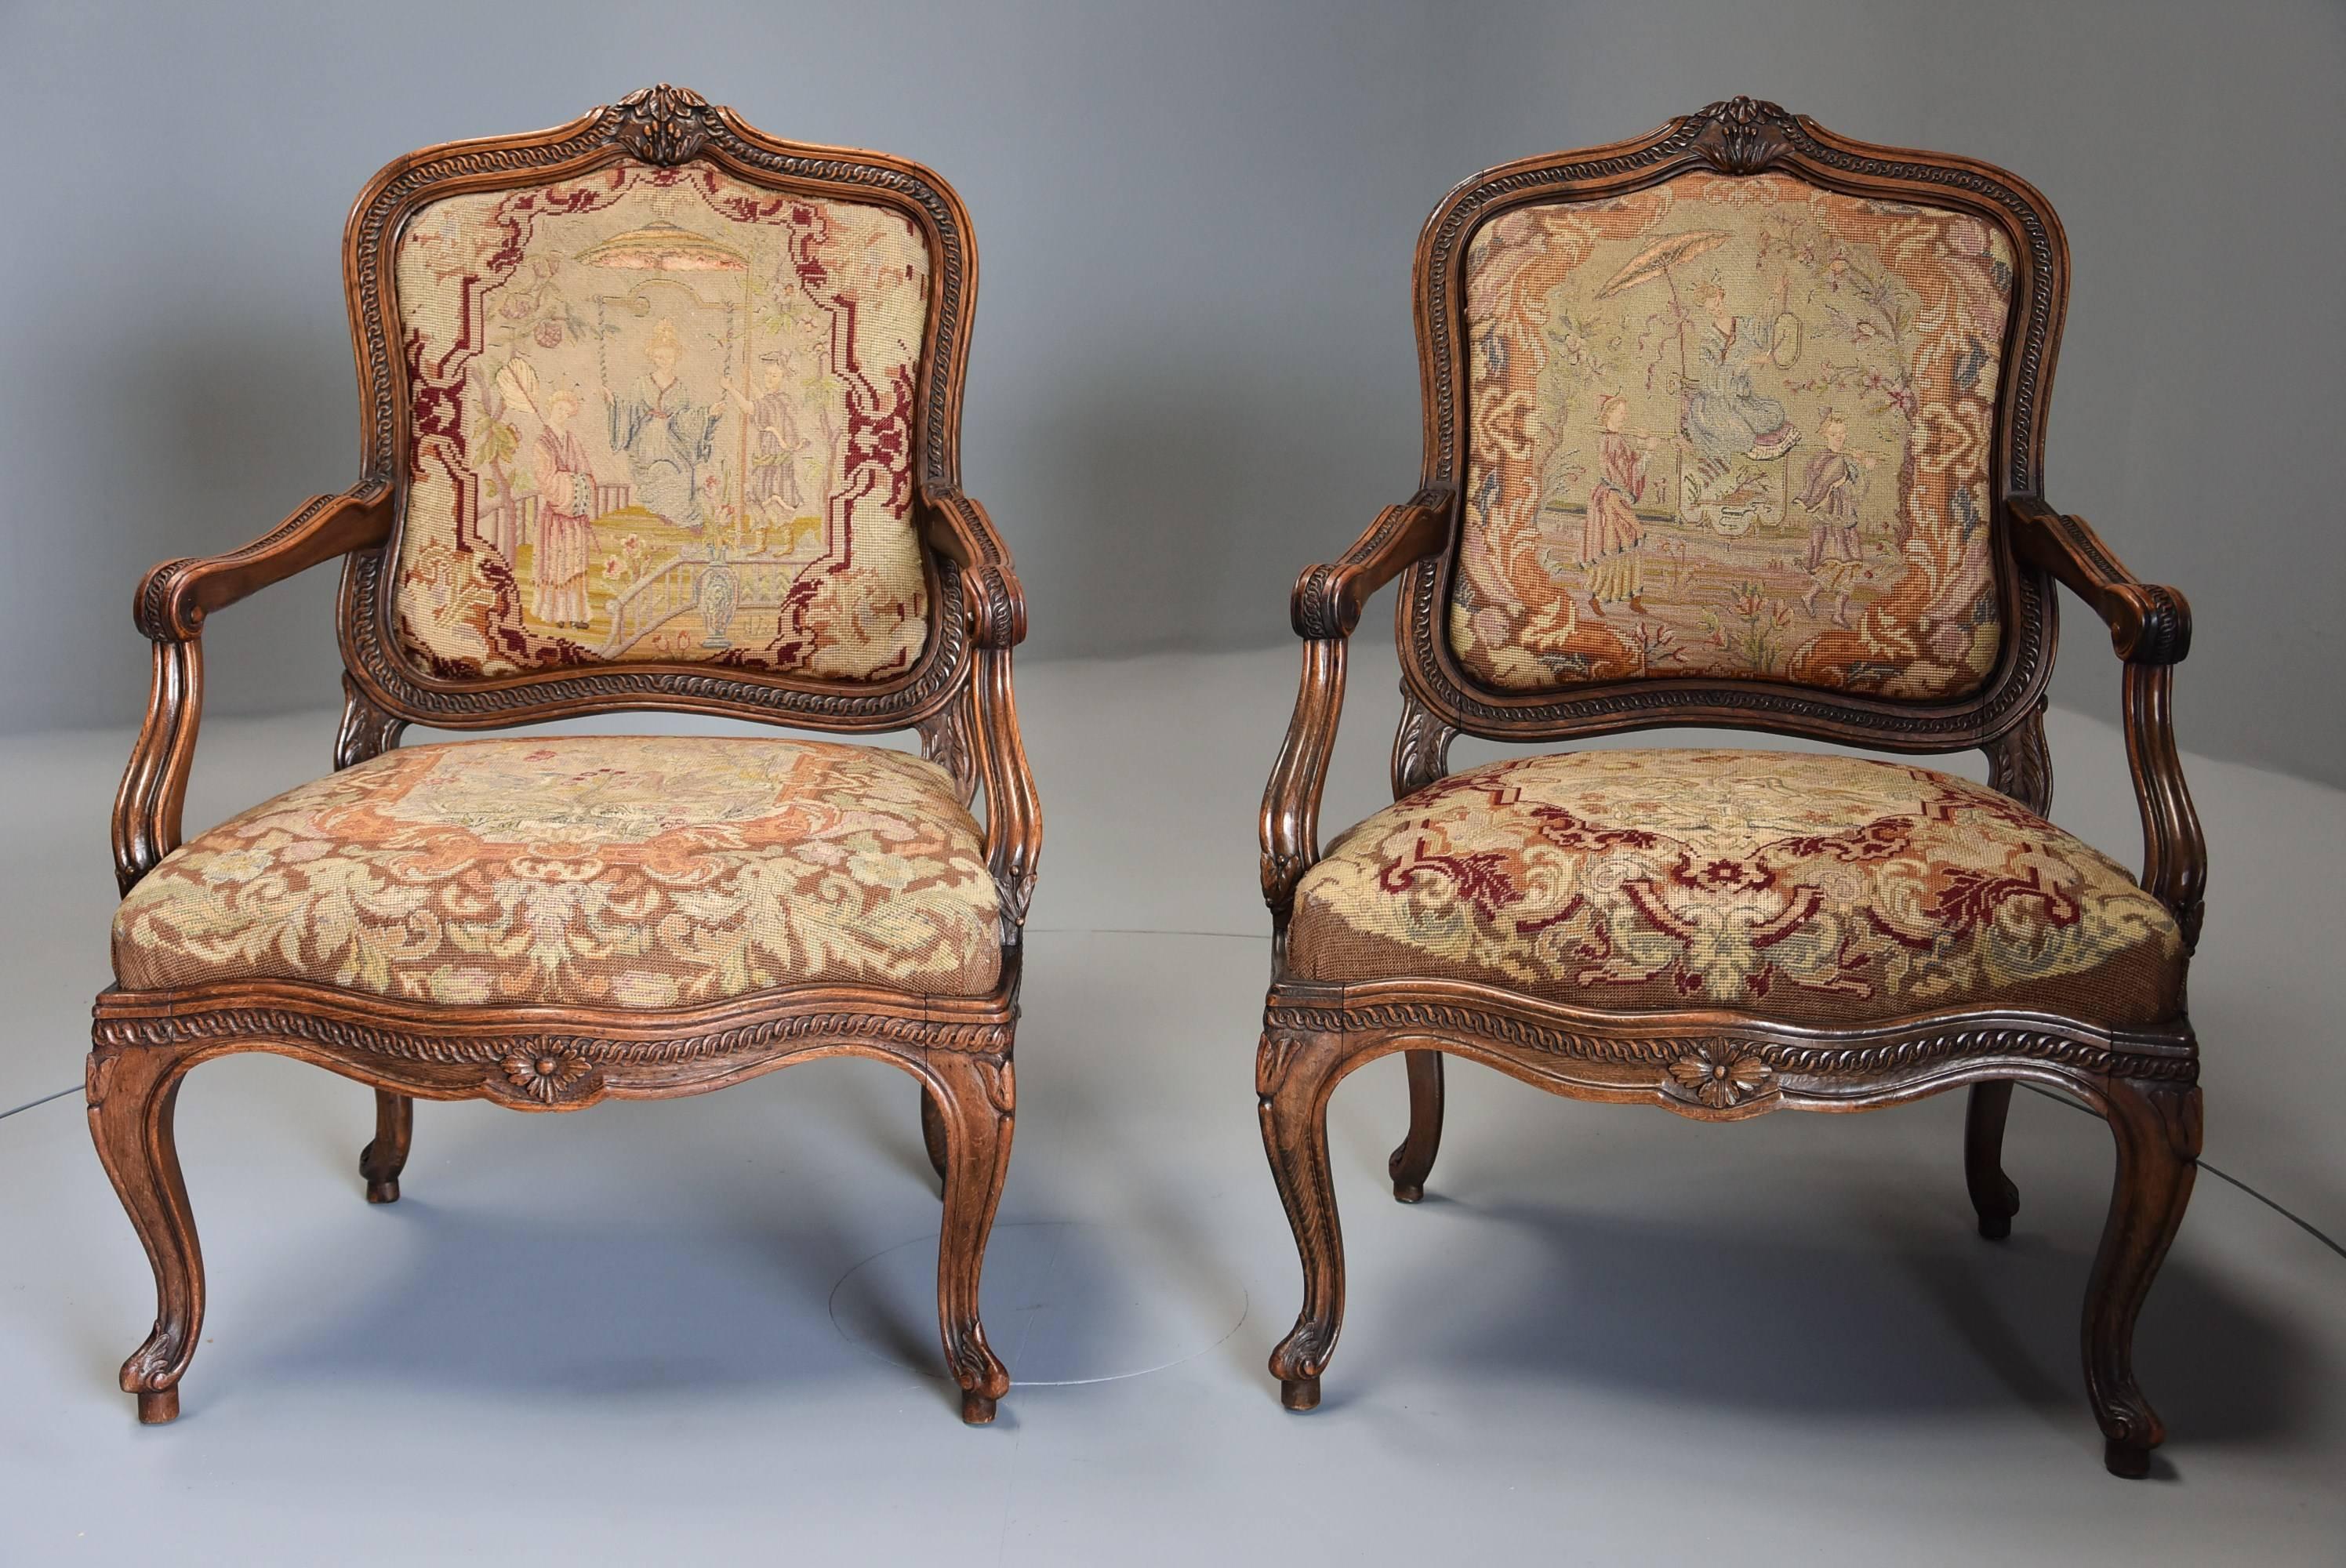 A pair of mid-late 19th century French fauteuils (open armchairs) of large proportion with original needlework.

This pair of chairs consist of stained beech frames, the backs being elaborately carved and shaped with central carved decoration to